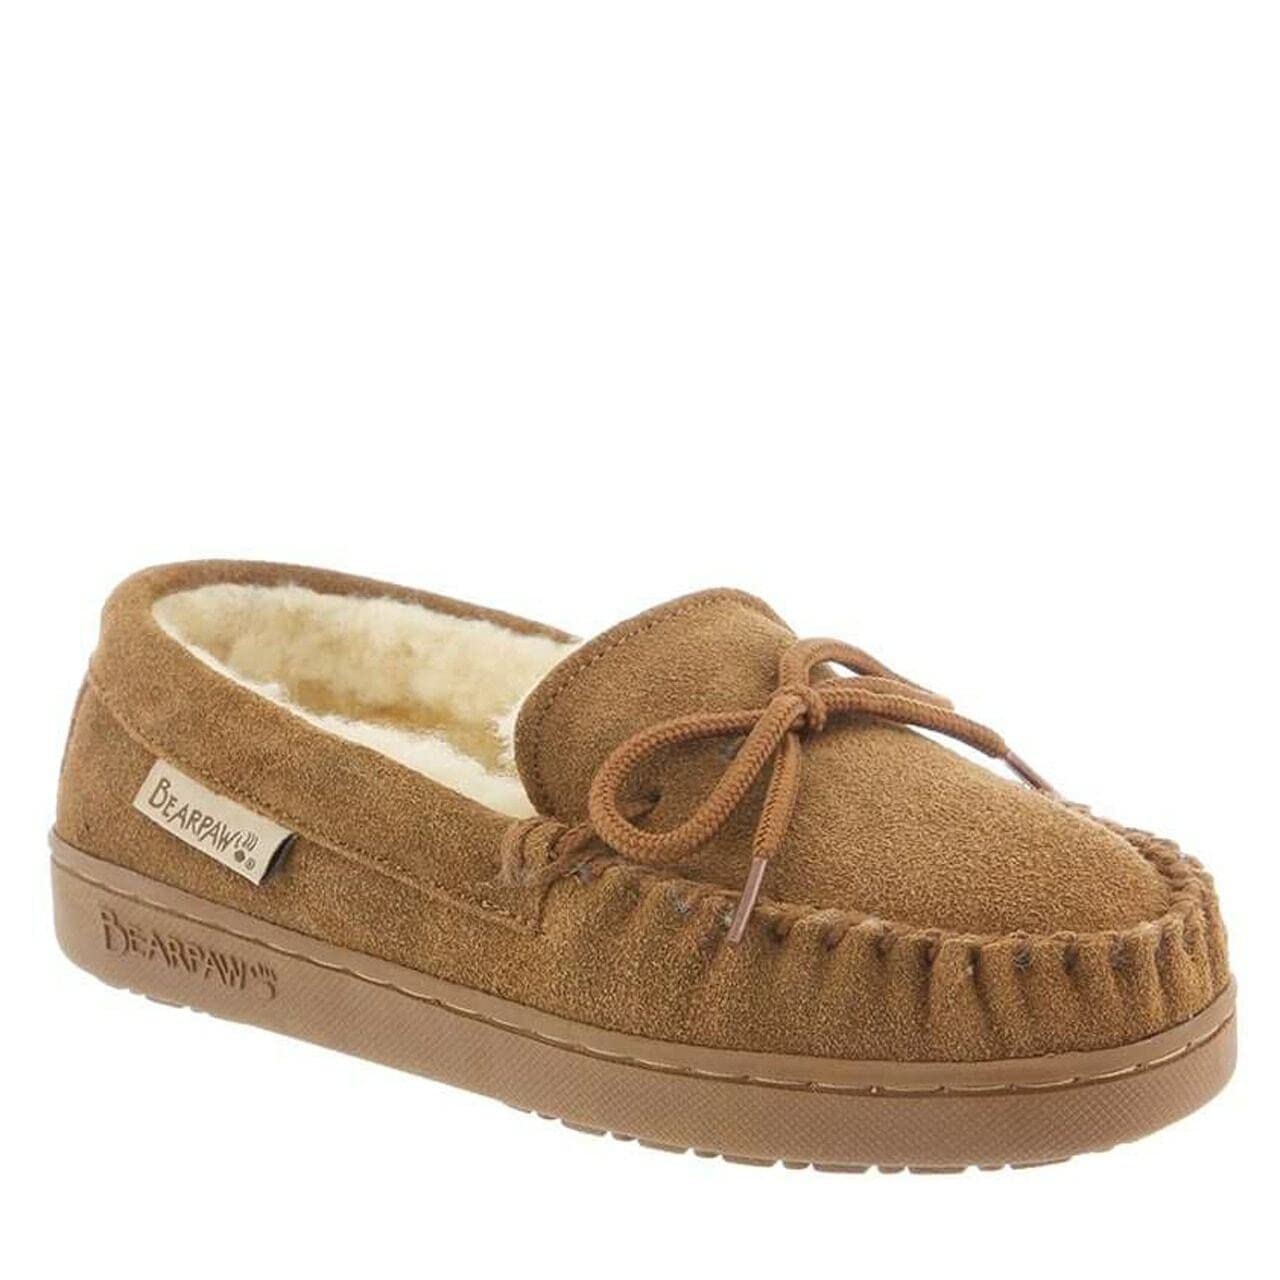 BEARPAW Moc II Youth Multiple Colors | Youth's Slipper | Youth's Shoe | Comfortable & Lightweight